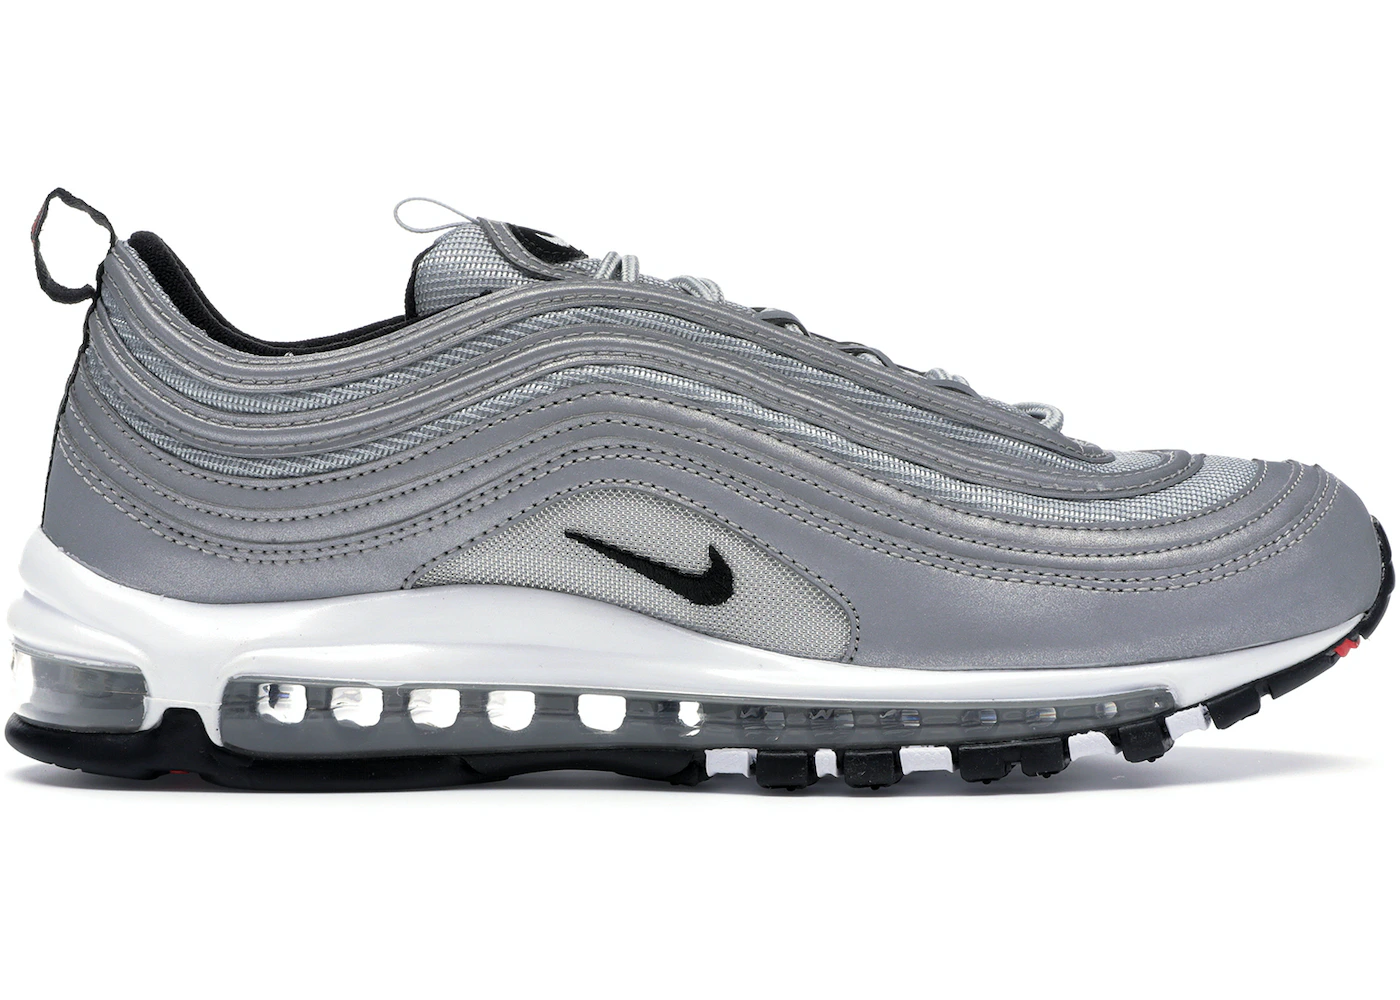 There is a need to Street Toll Nike Air Max 97 Reflective Silver Men's - 312834-007 - US